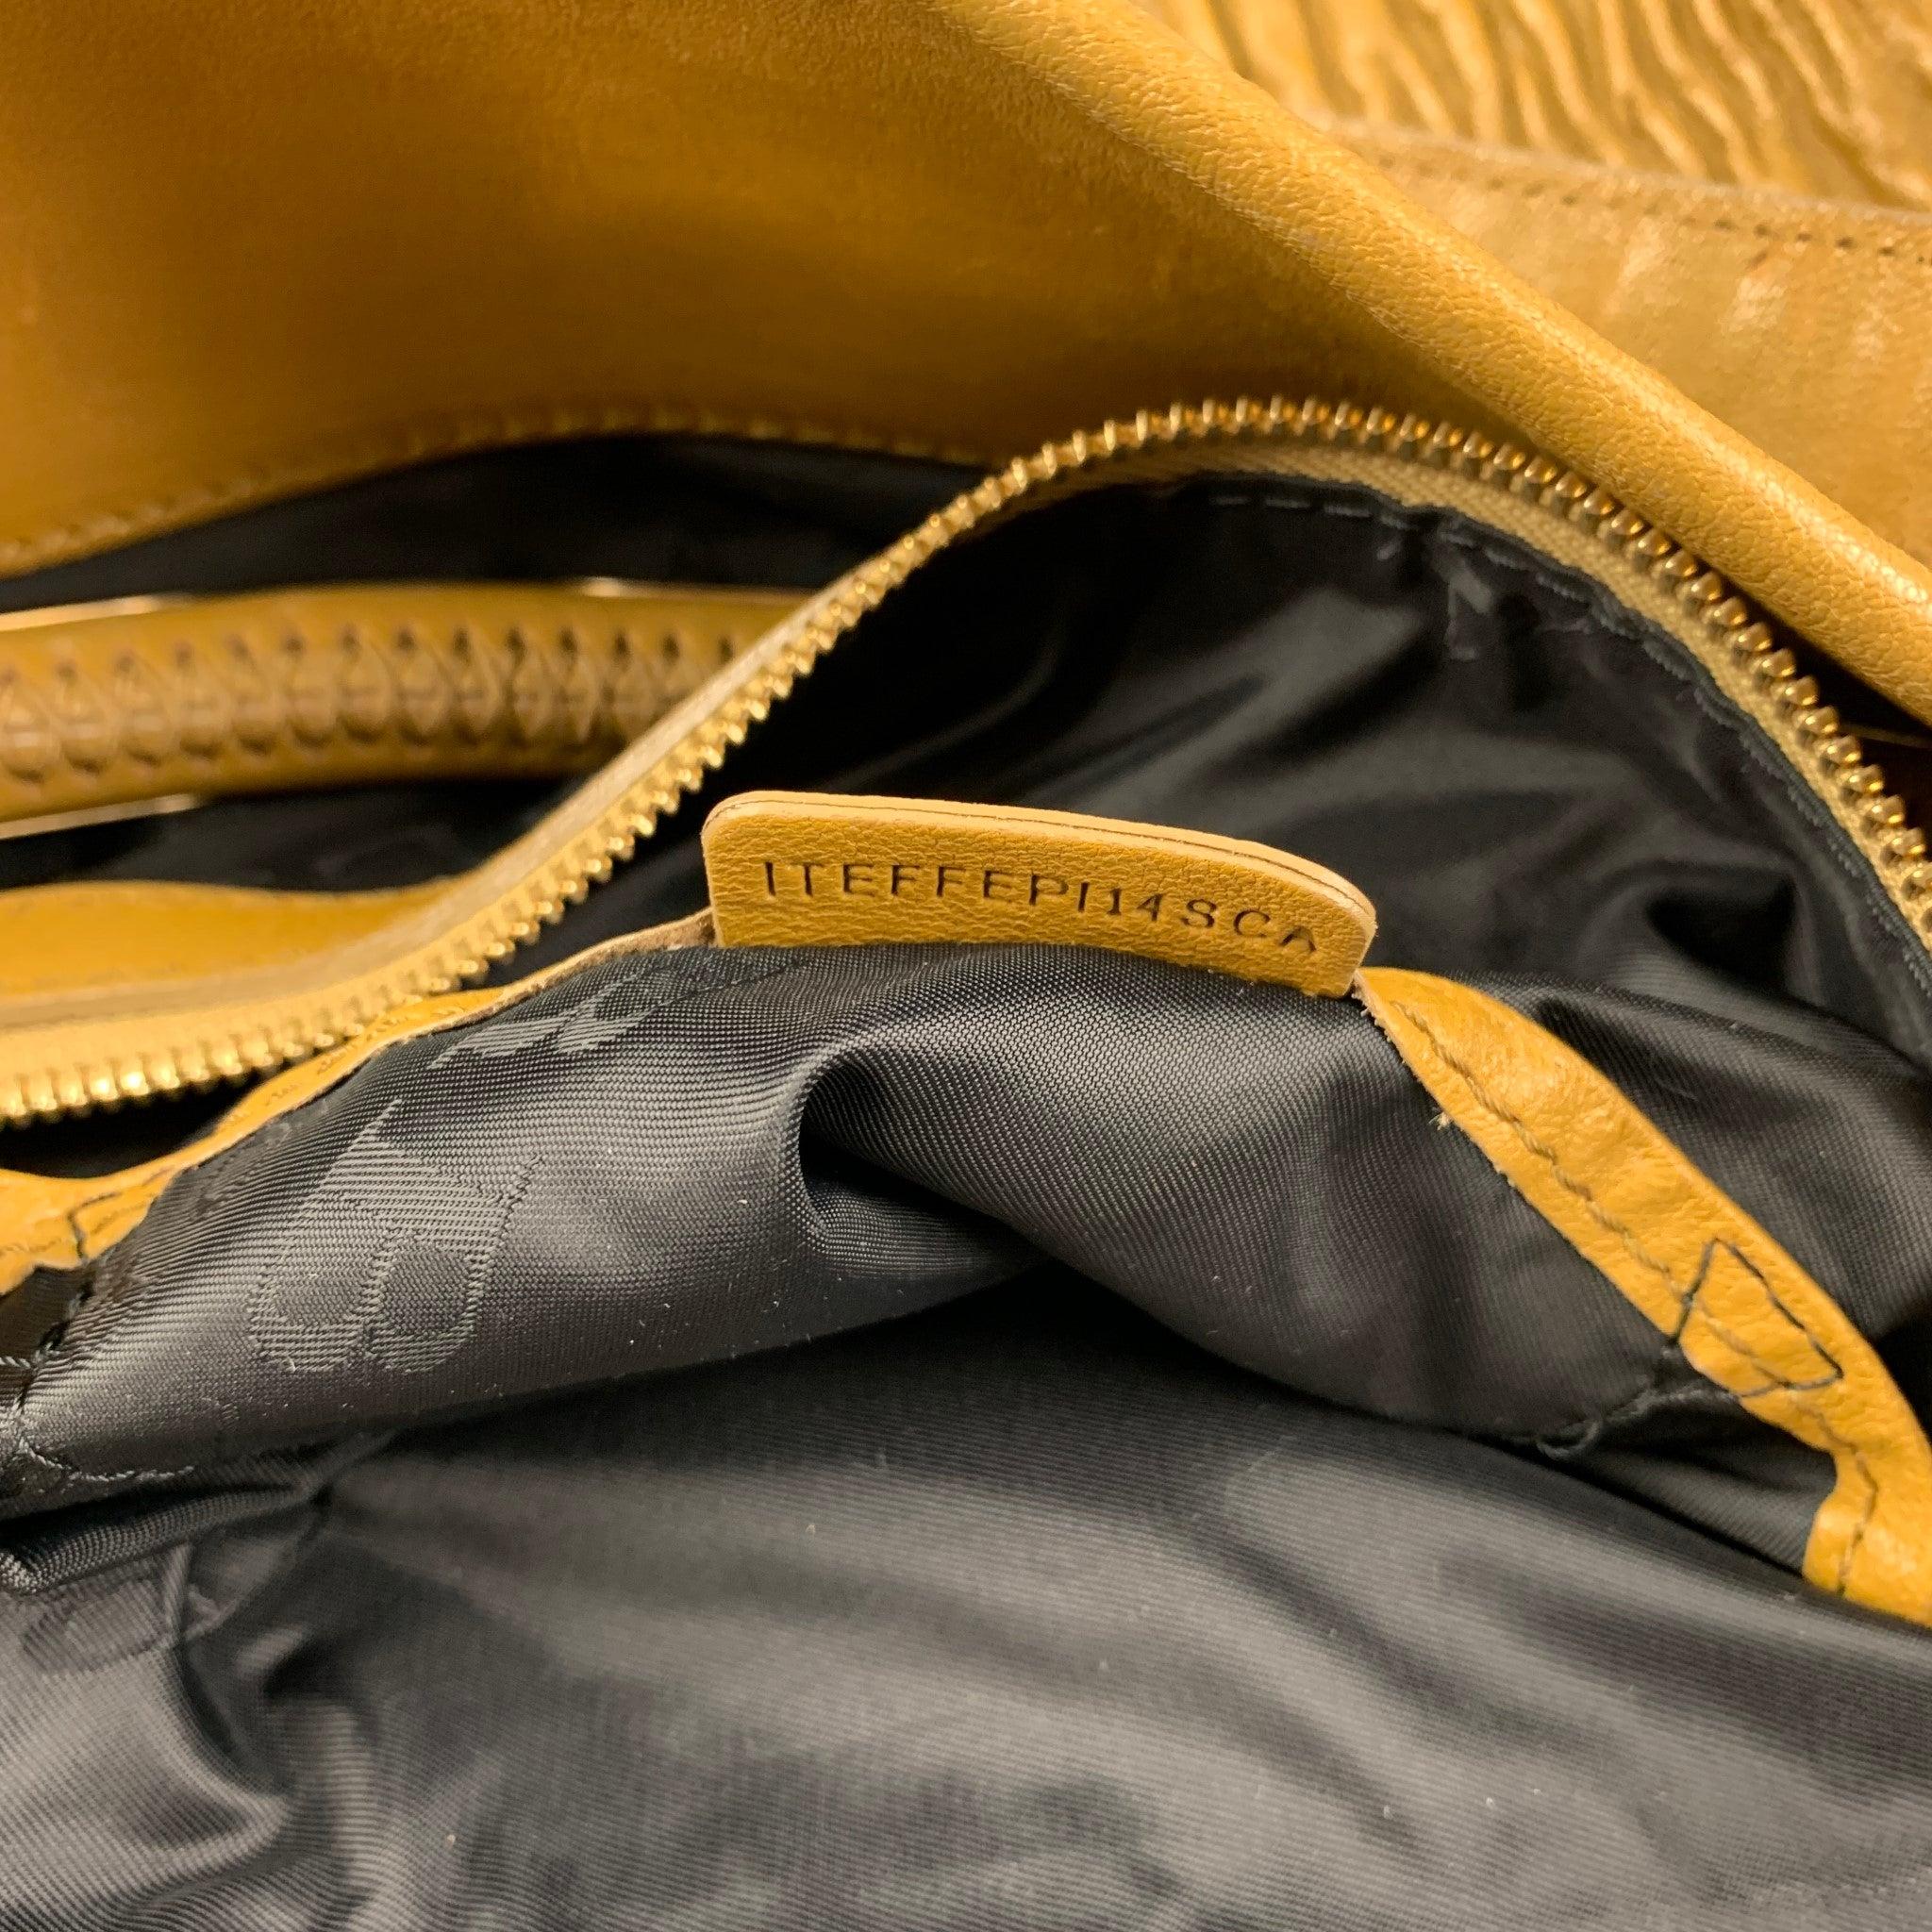 BURBERRY PRORSUM Mustard Ruched Leather Tote Handbag 2